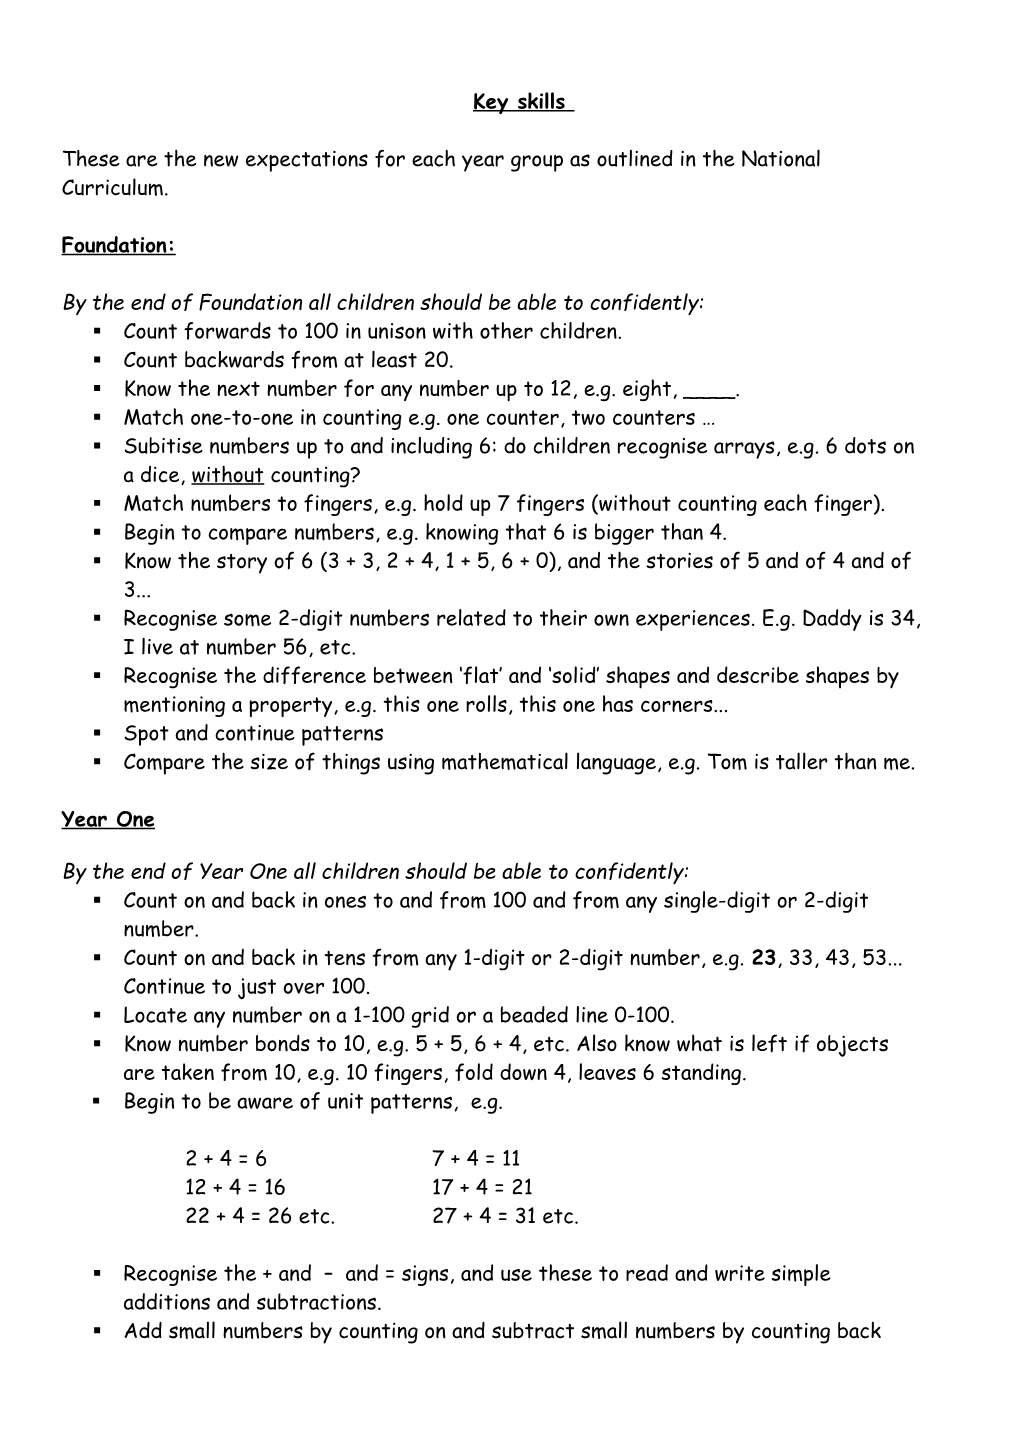 Outcomes for All Children in Maths